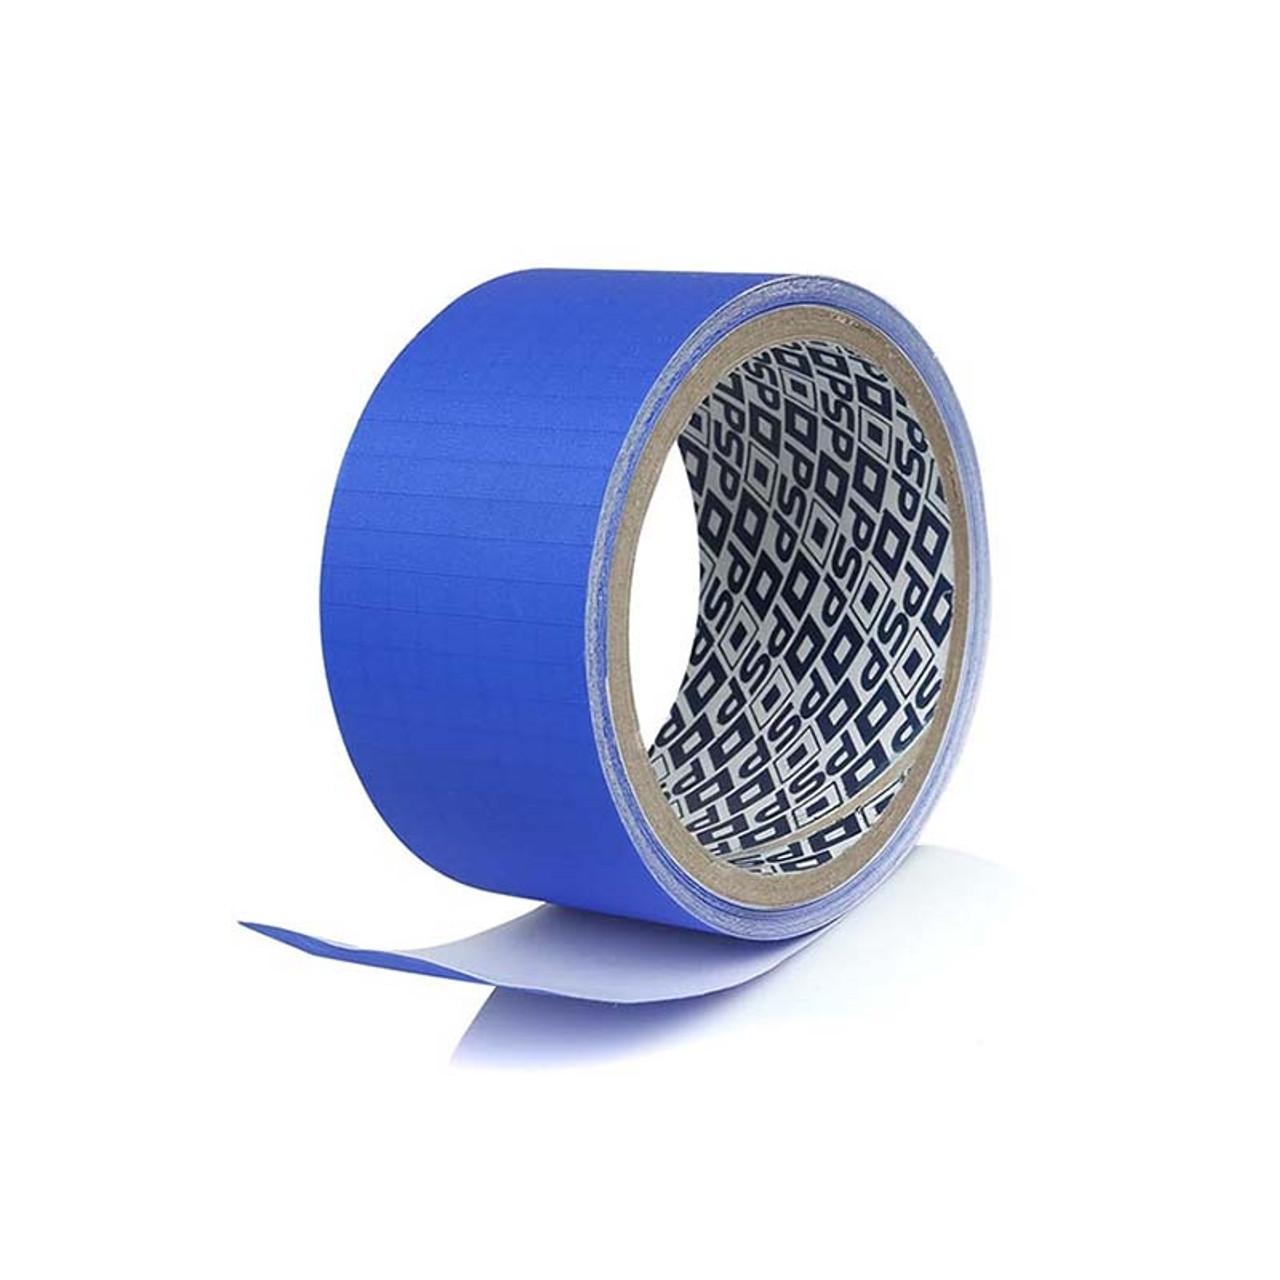 PSP Spinnaker Repair Tape - Known for a fast effective repair